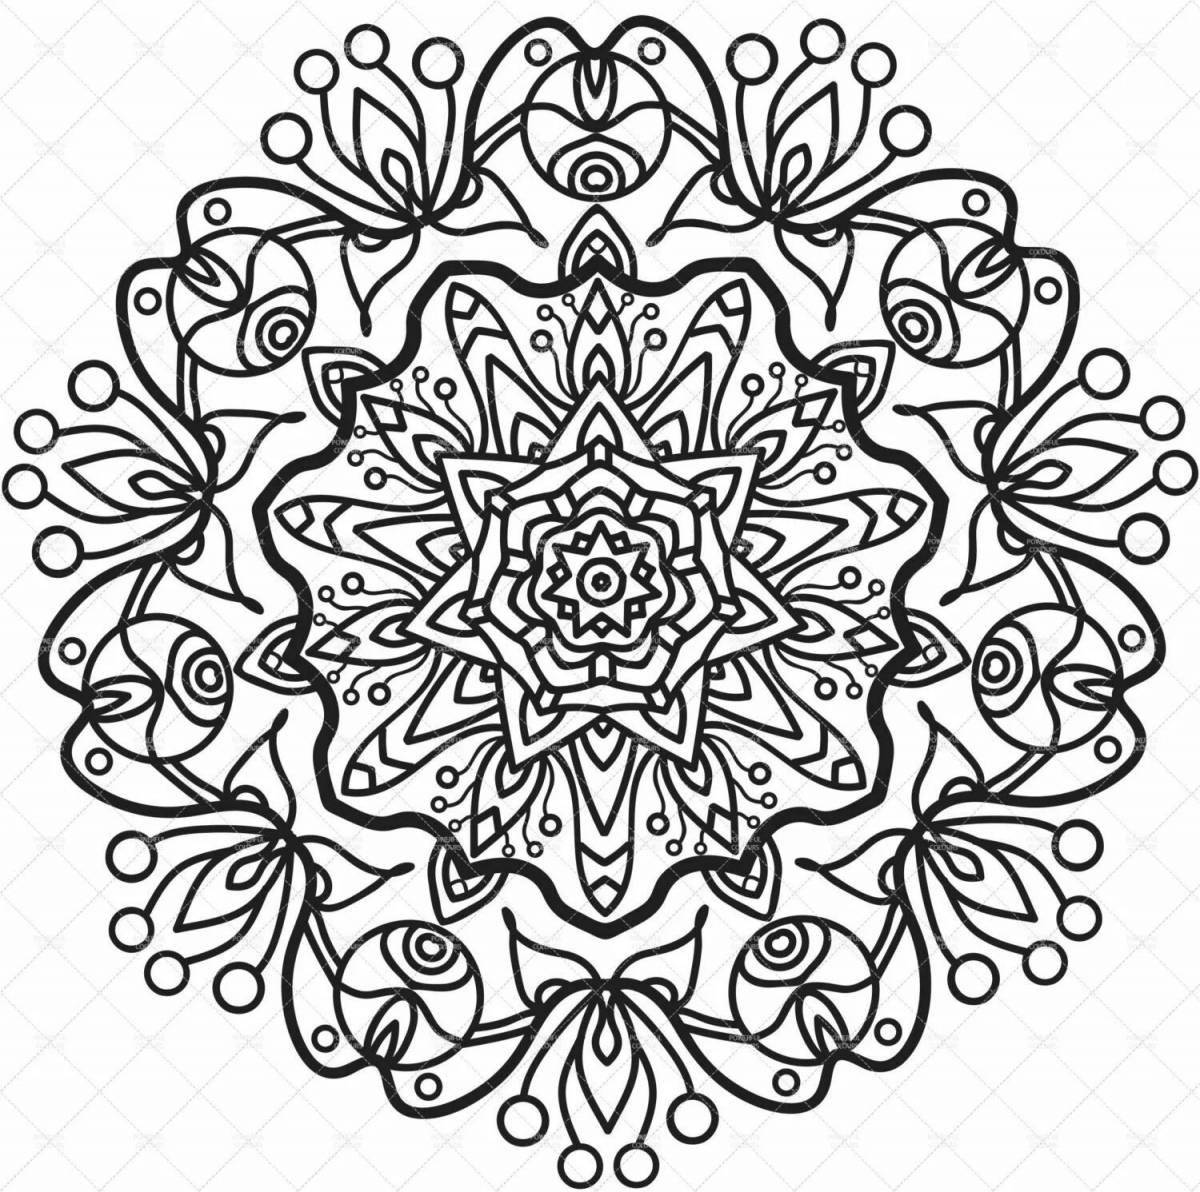 Animated coloring book for peace of mind